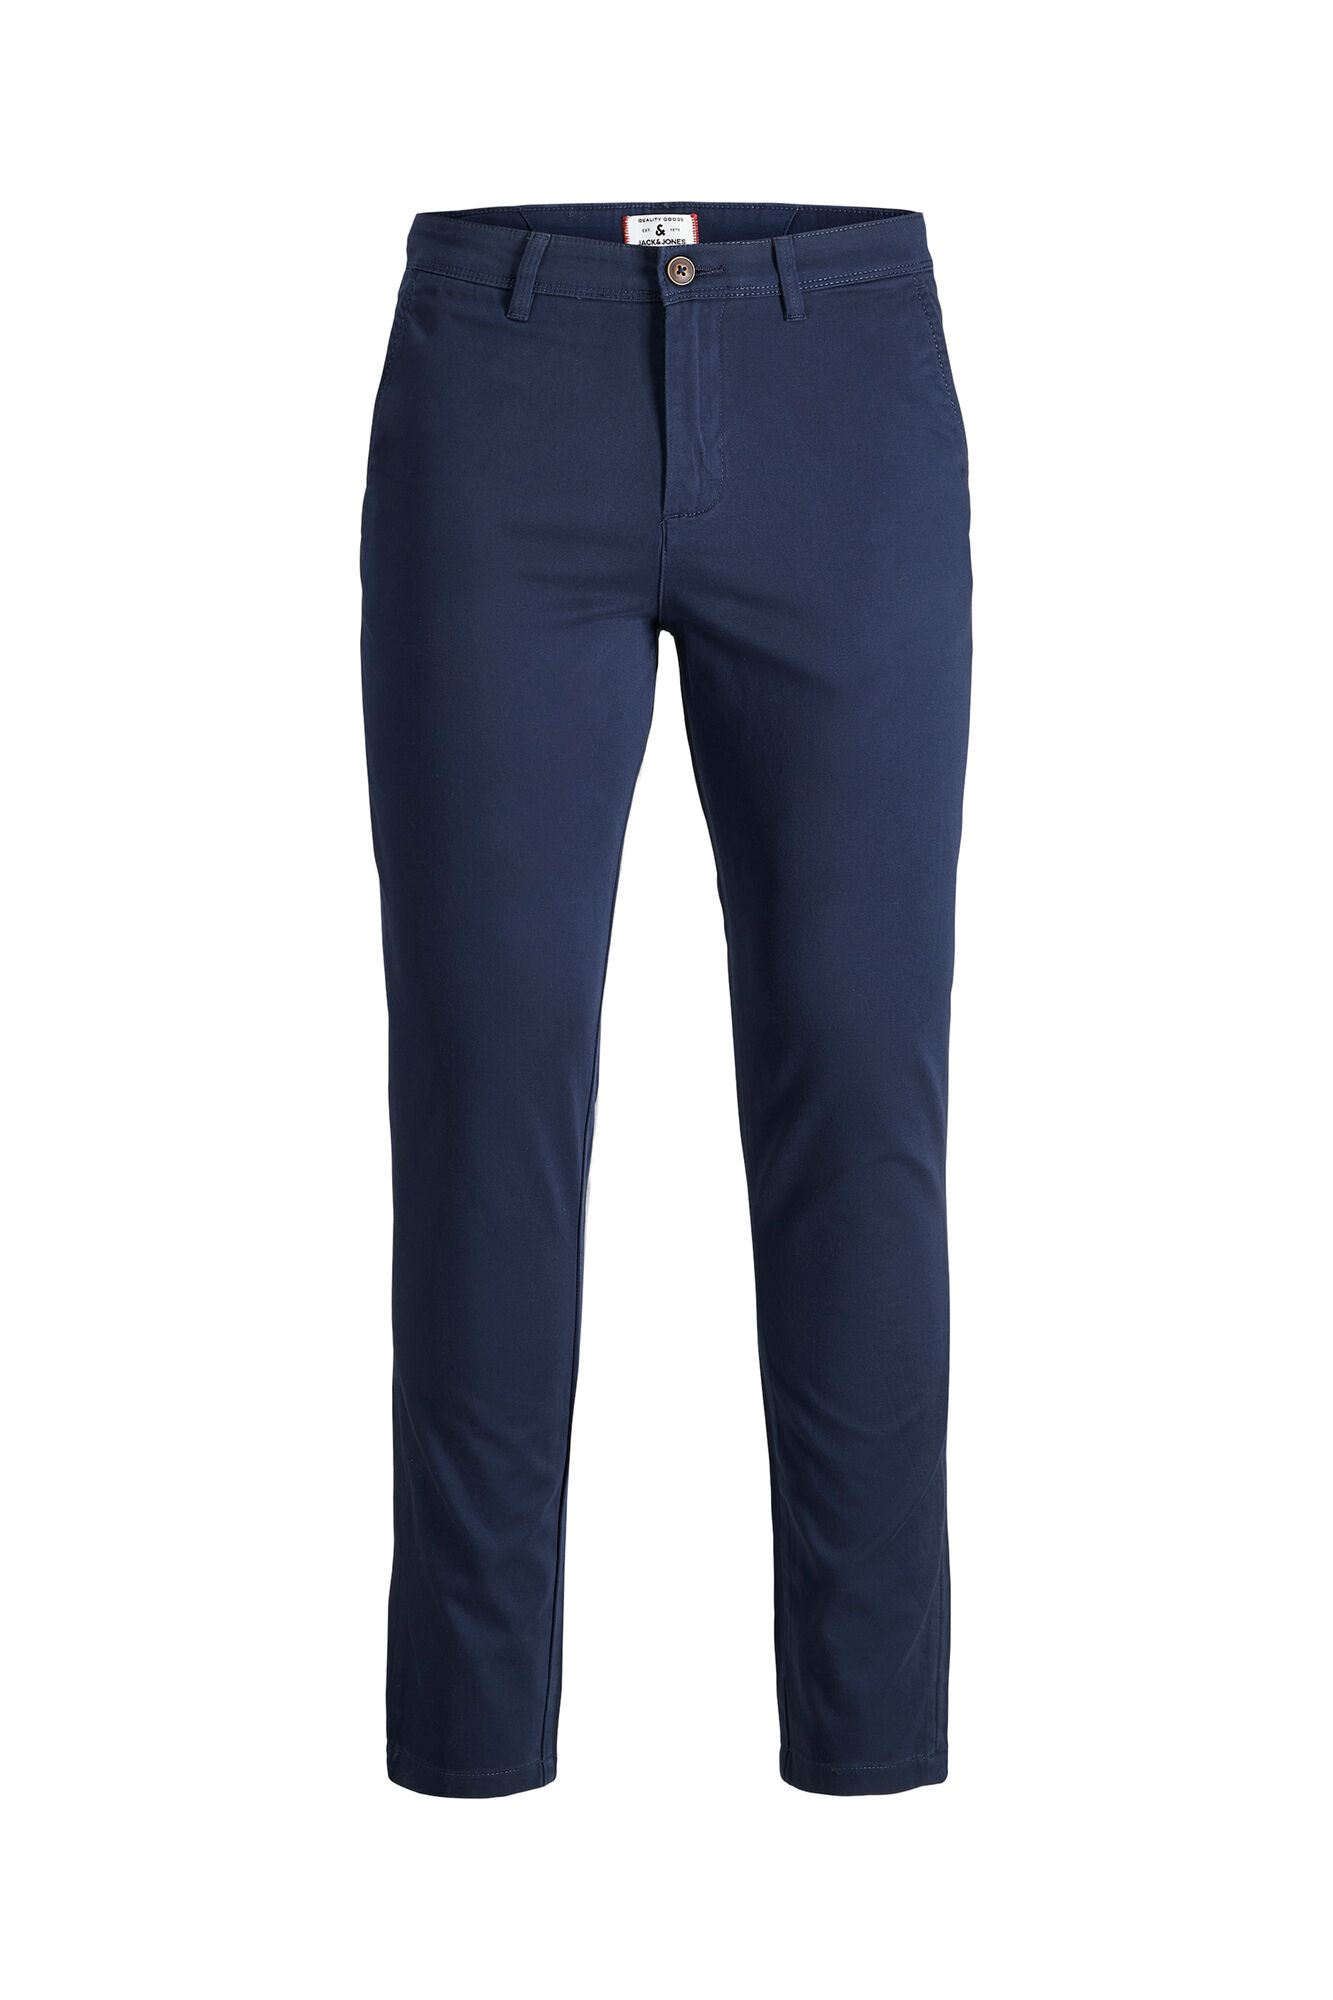 Men Casual Trousers - Buy Mens Casual Trousers Online With Discounted  Pricing At Ketch